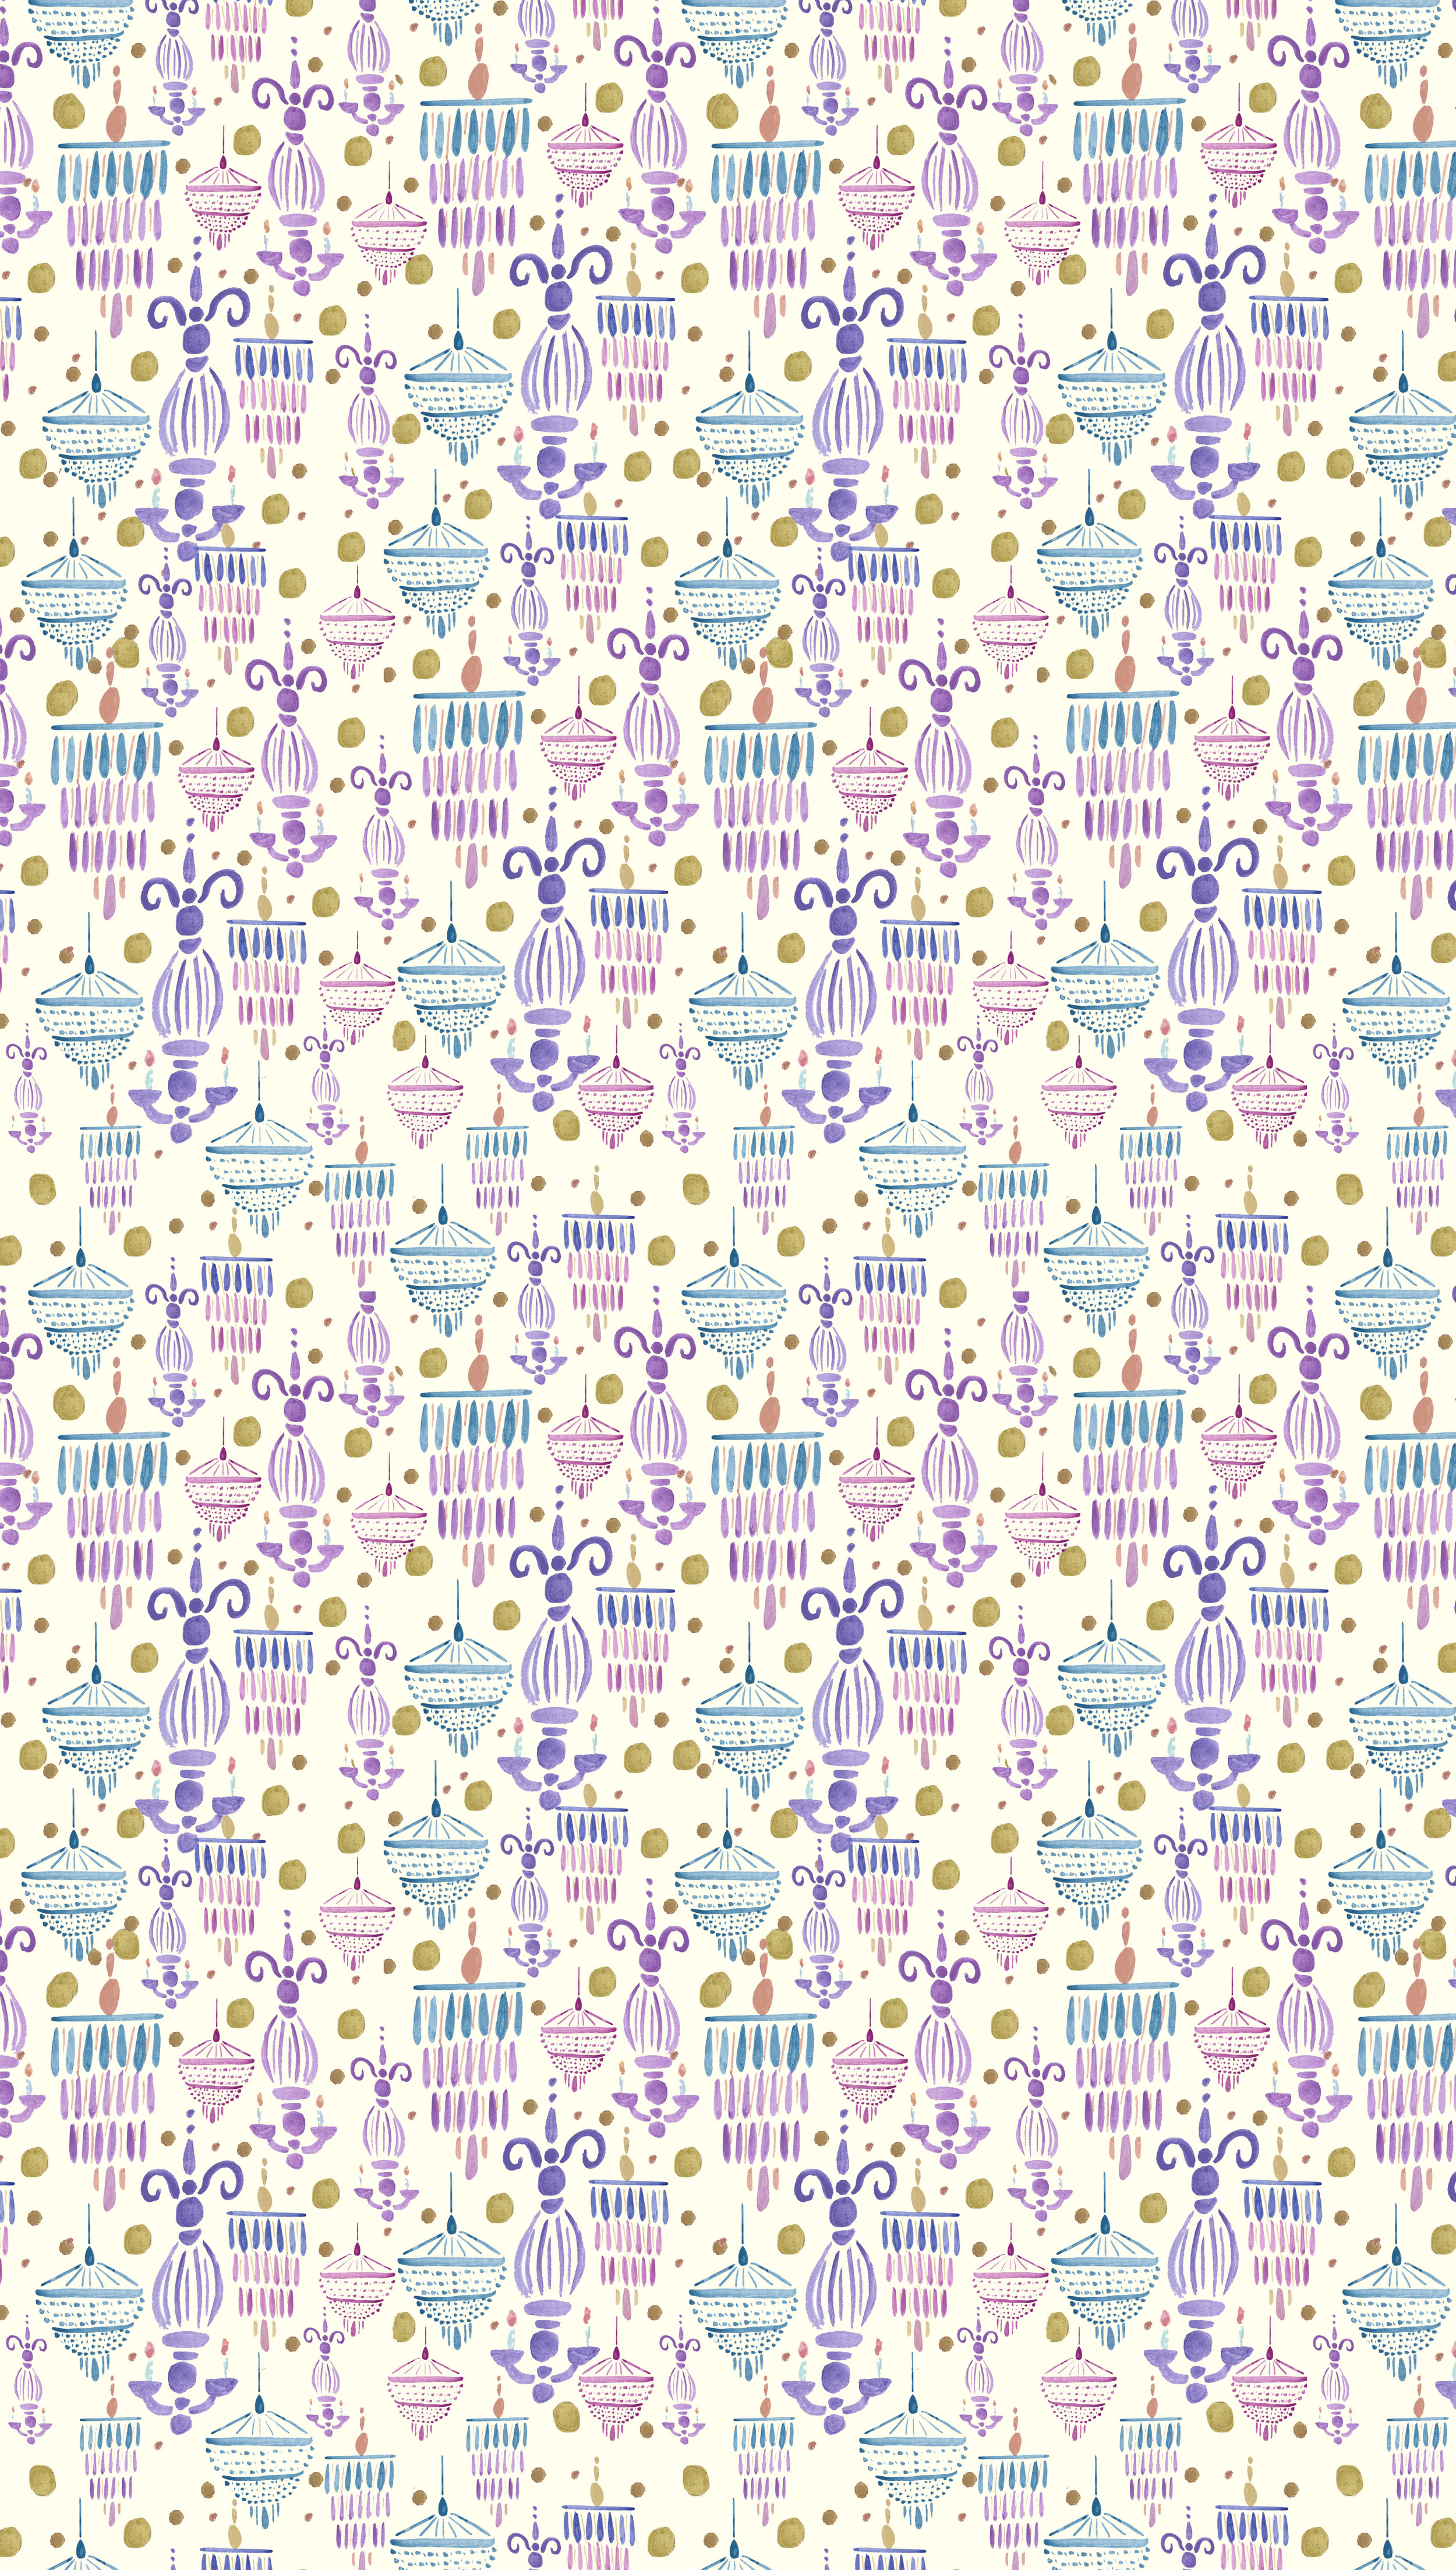  2014. Watercolor painting transformed into repeat pattern in Adobe Photoshop. 